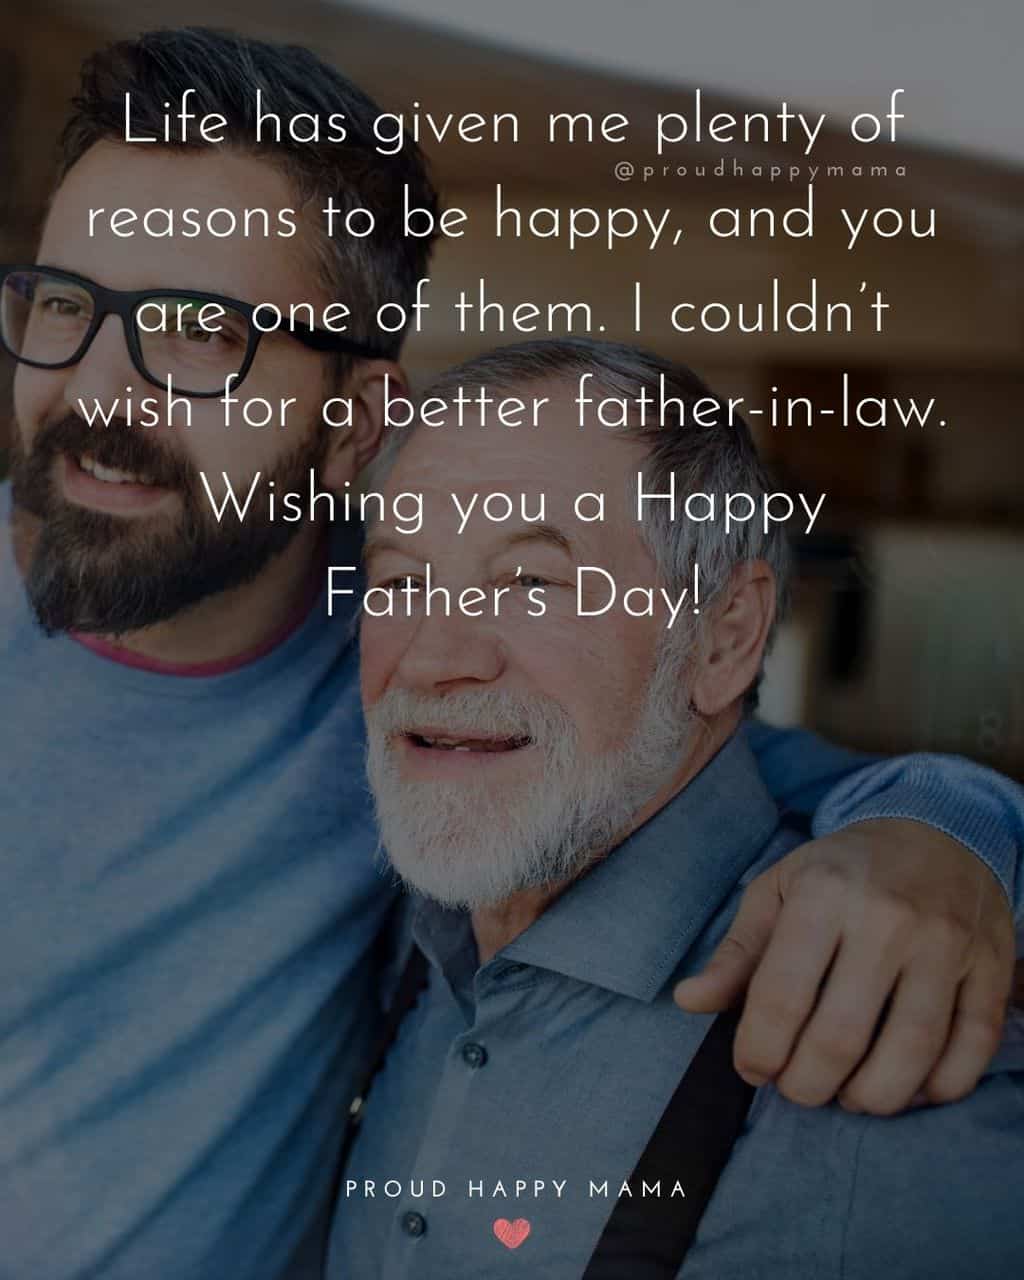 Happy Fathers Day Quotes For Father In Law - Life has given me plenty of reasons to be happy, and you are one of them. I